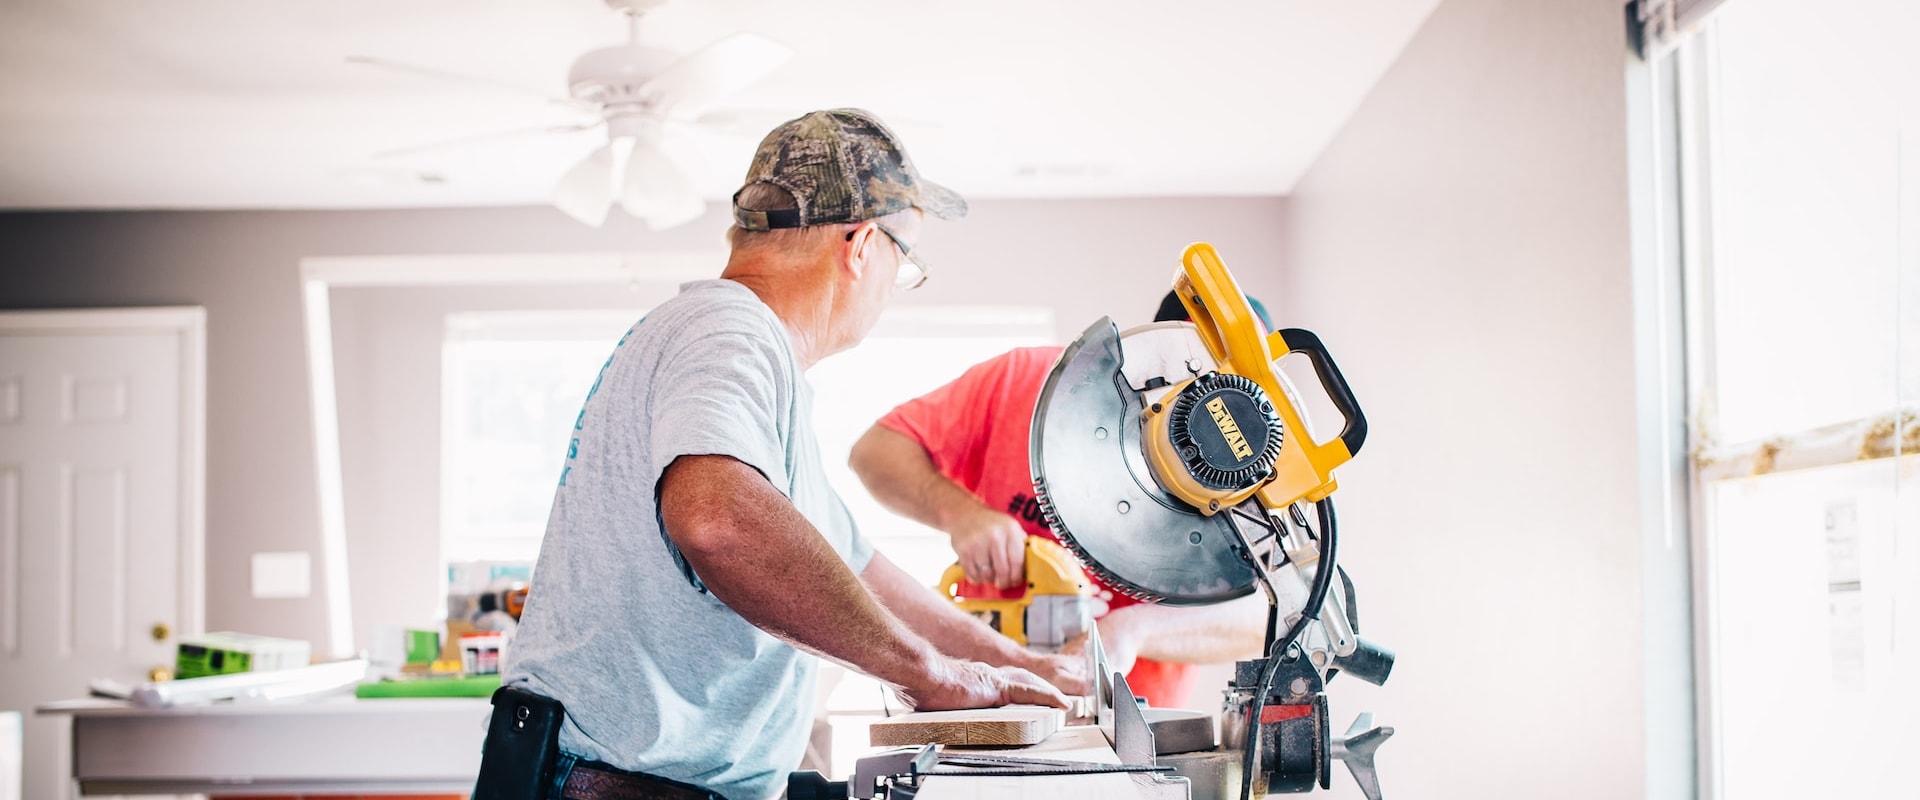 What You Need To Know About Kitchen Repair Costs During Foundation Repair Projects In Florida